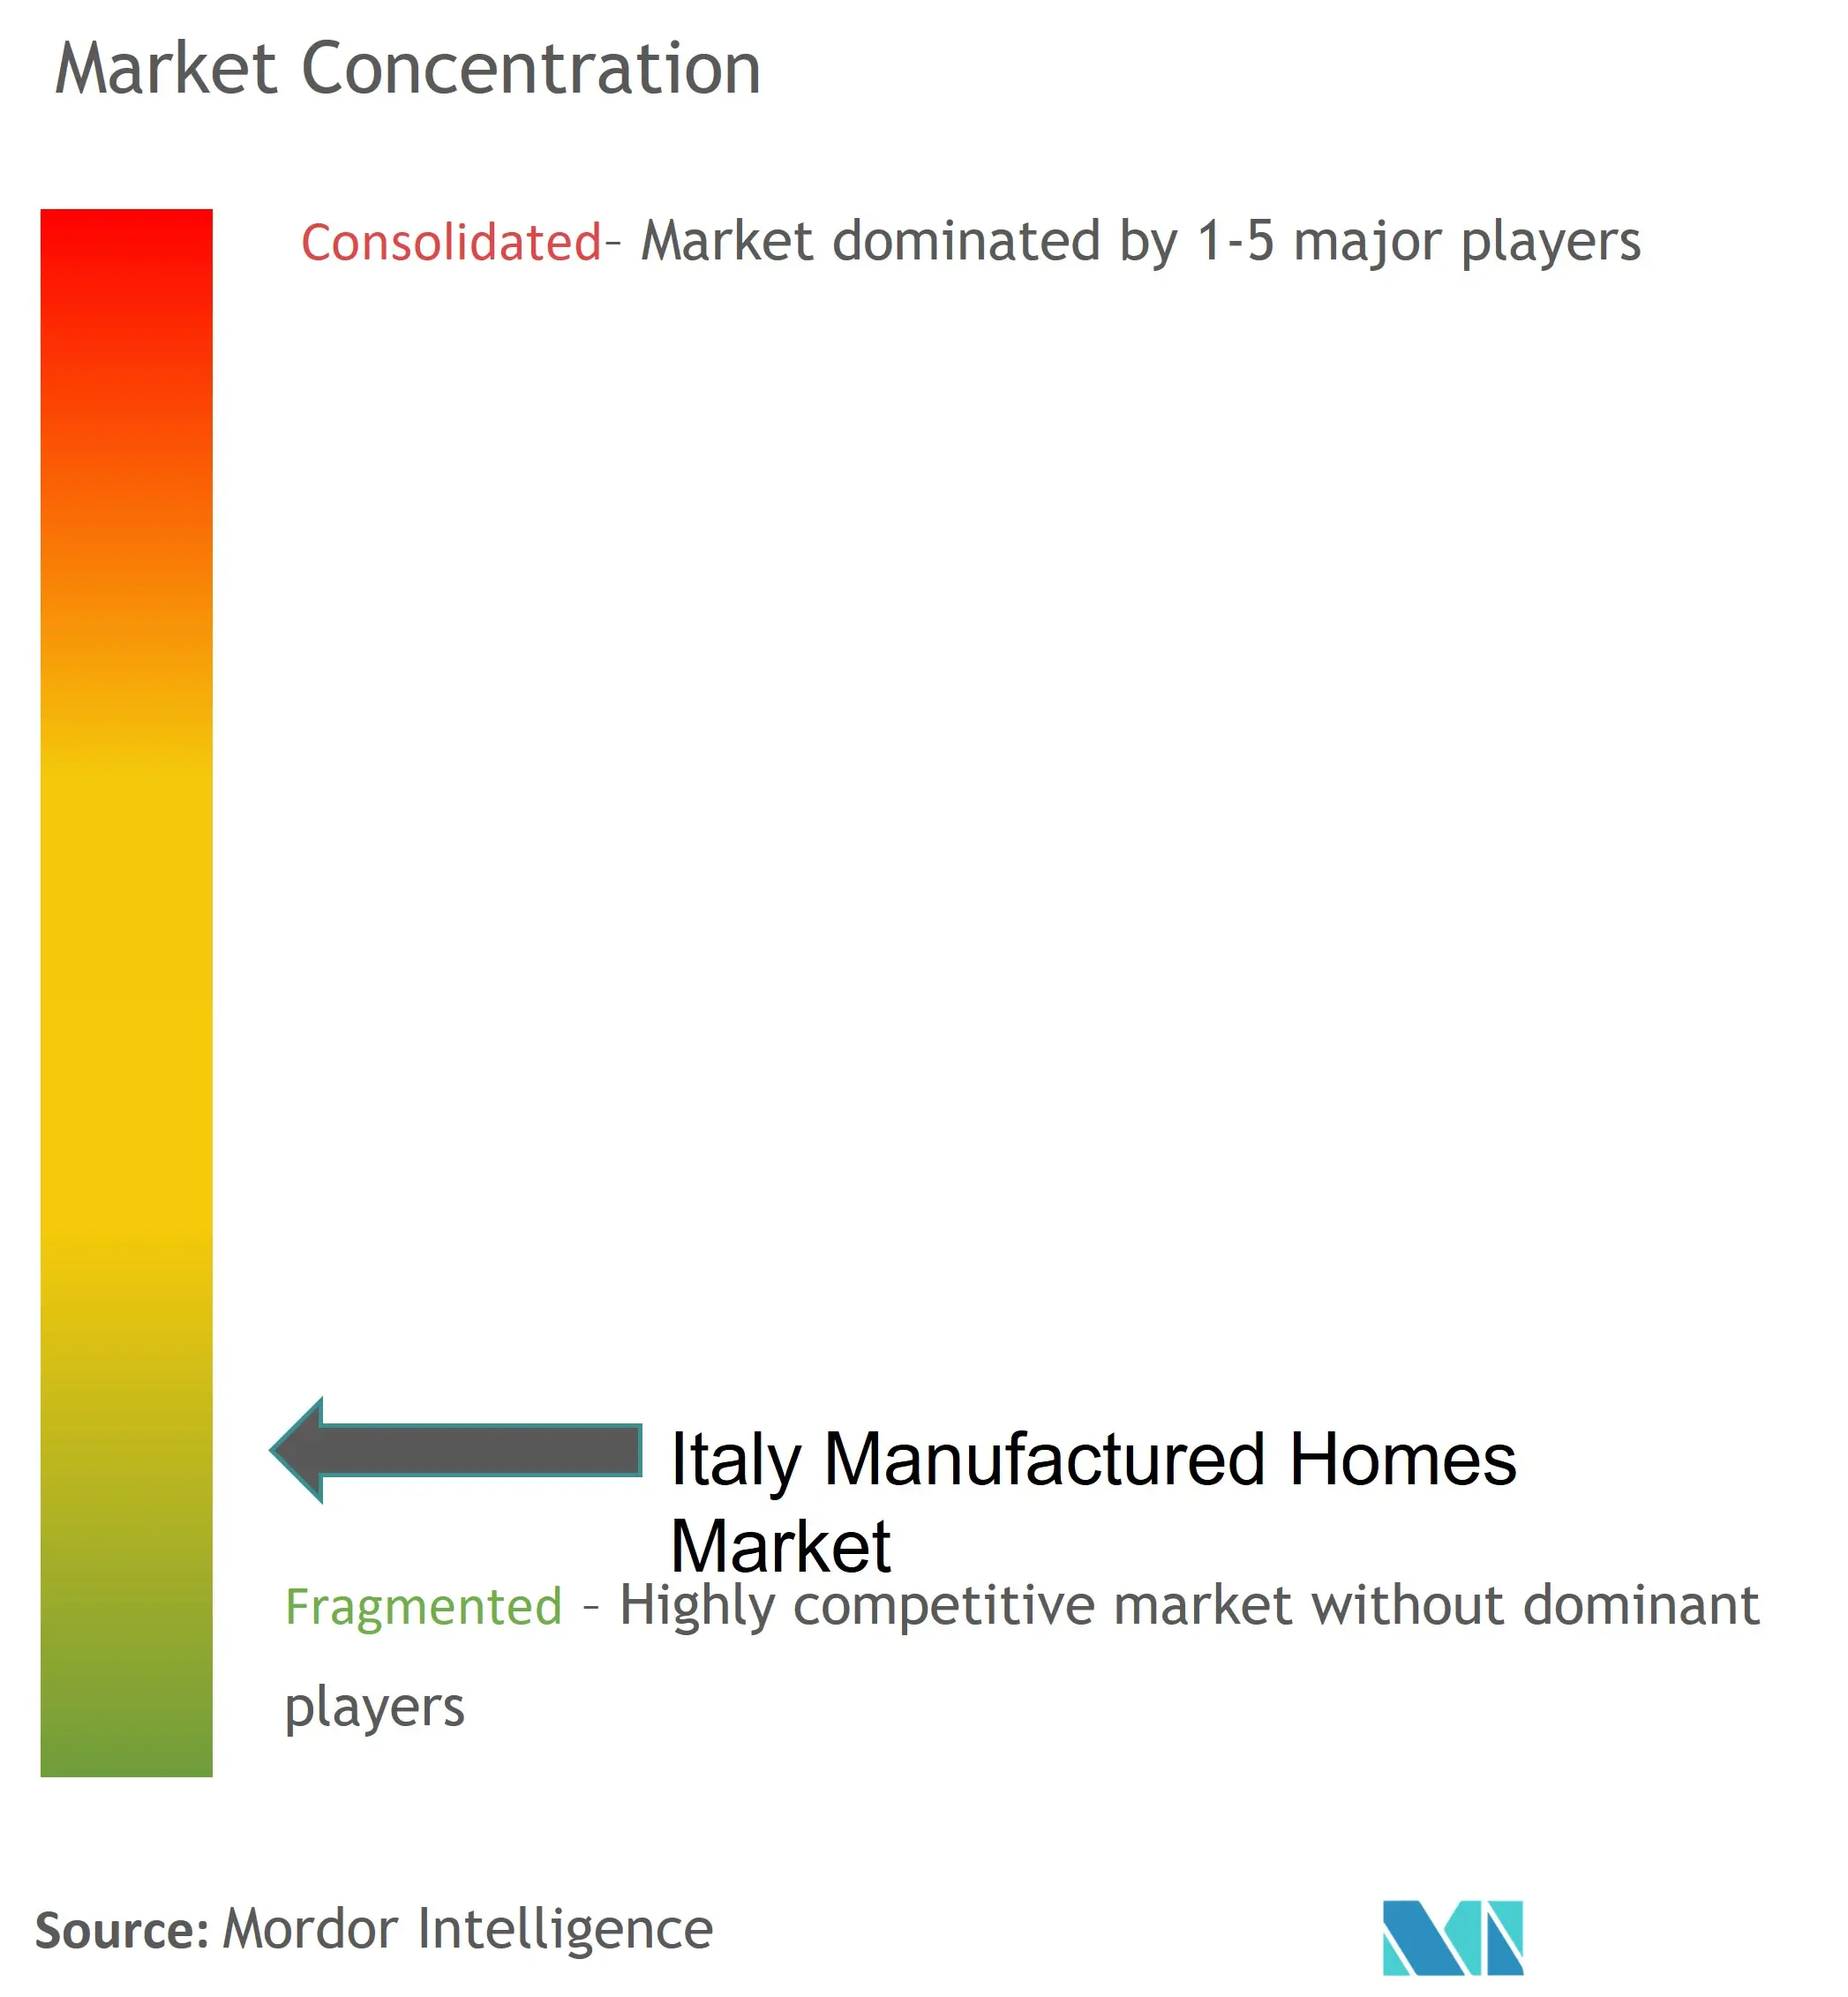 Italy Manufactured Homes Market  Concentration